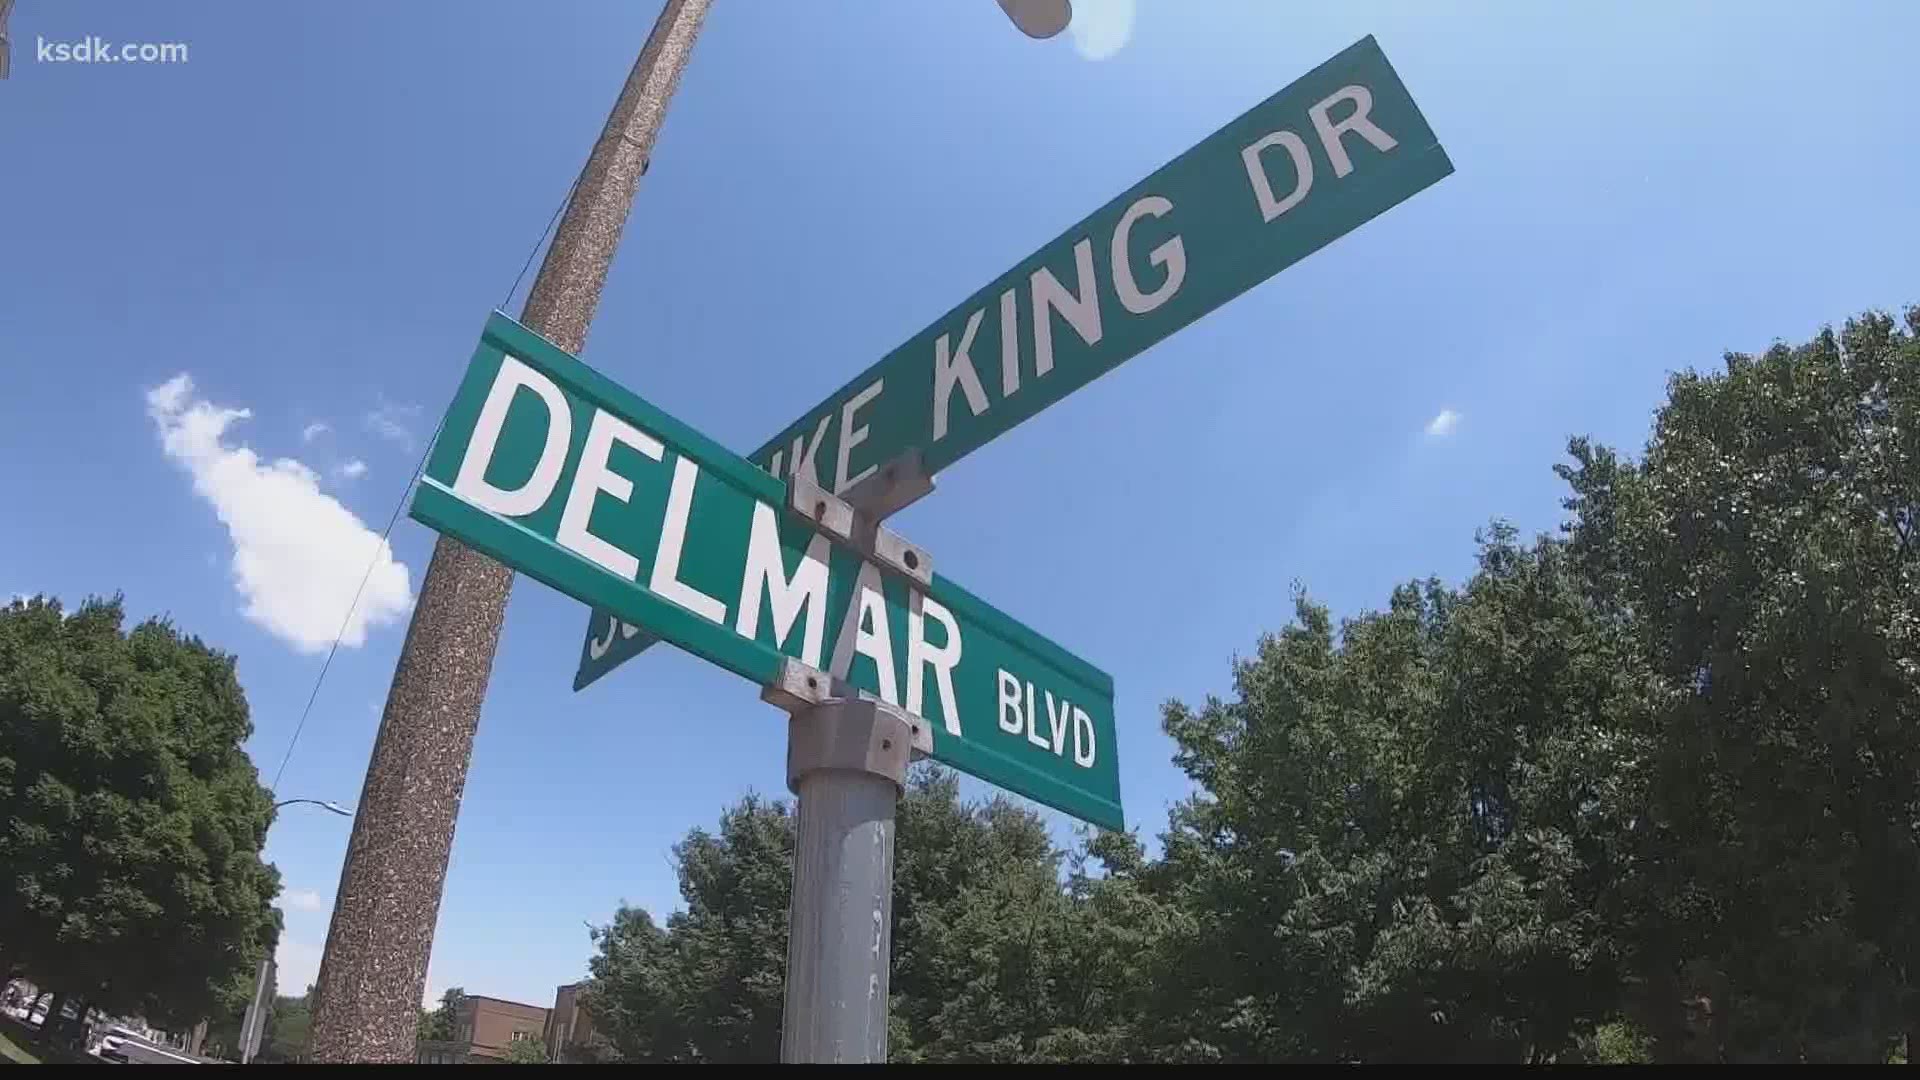 "If it is good to name a street after a policeman killed by a civilian, would it not be just to name a street after a civilian killed by a policeman?"